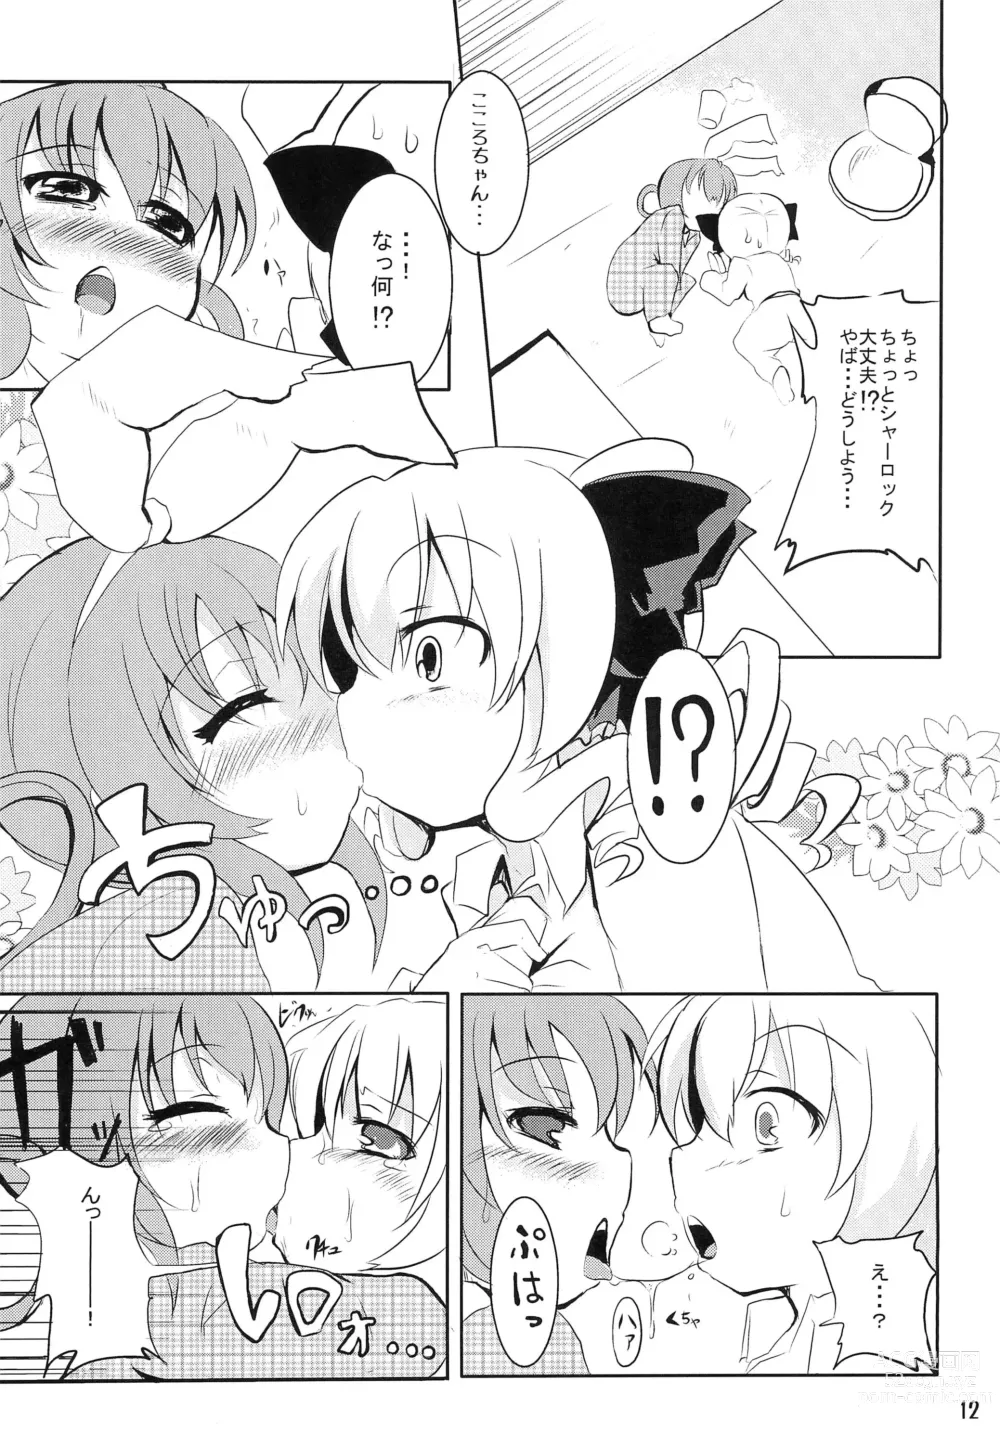 Page 12 of doujinshi Milky Syrup